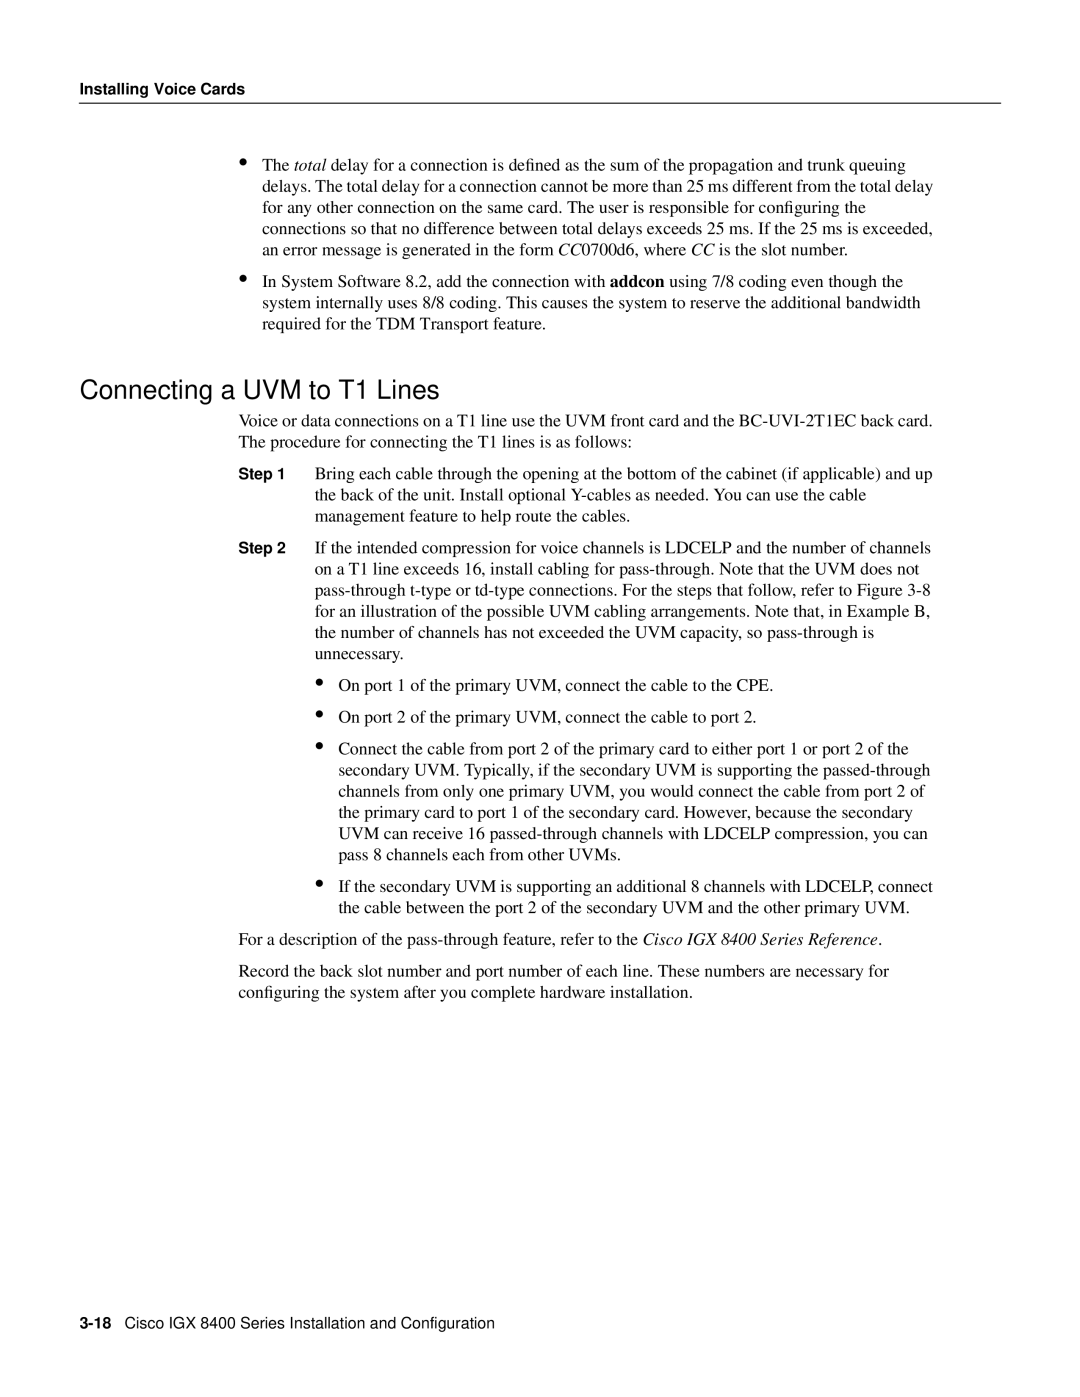 Cisco Systems IGX 8400 Series manual Connecting a UVM to T1 Lines 